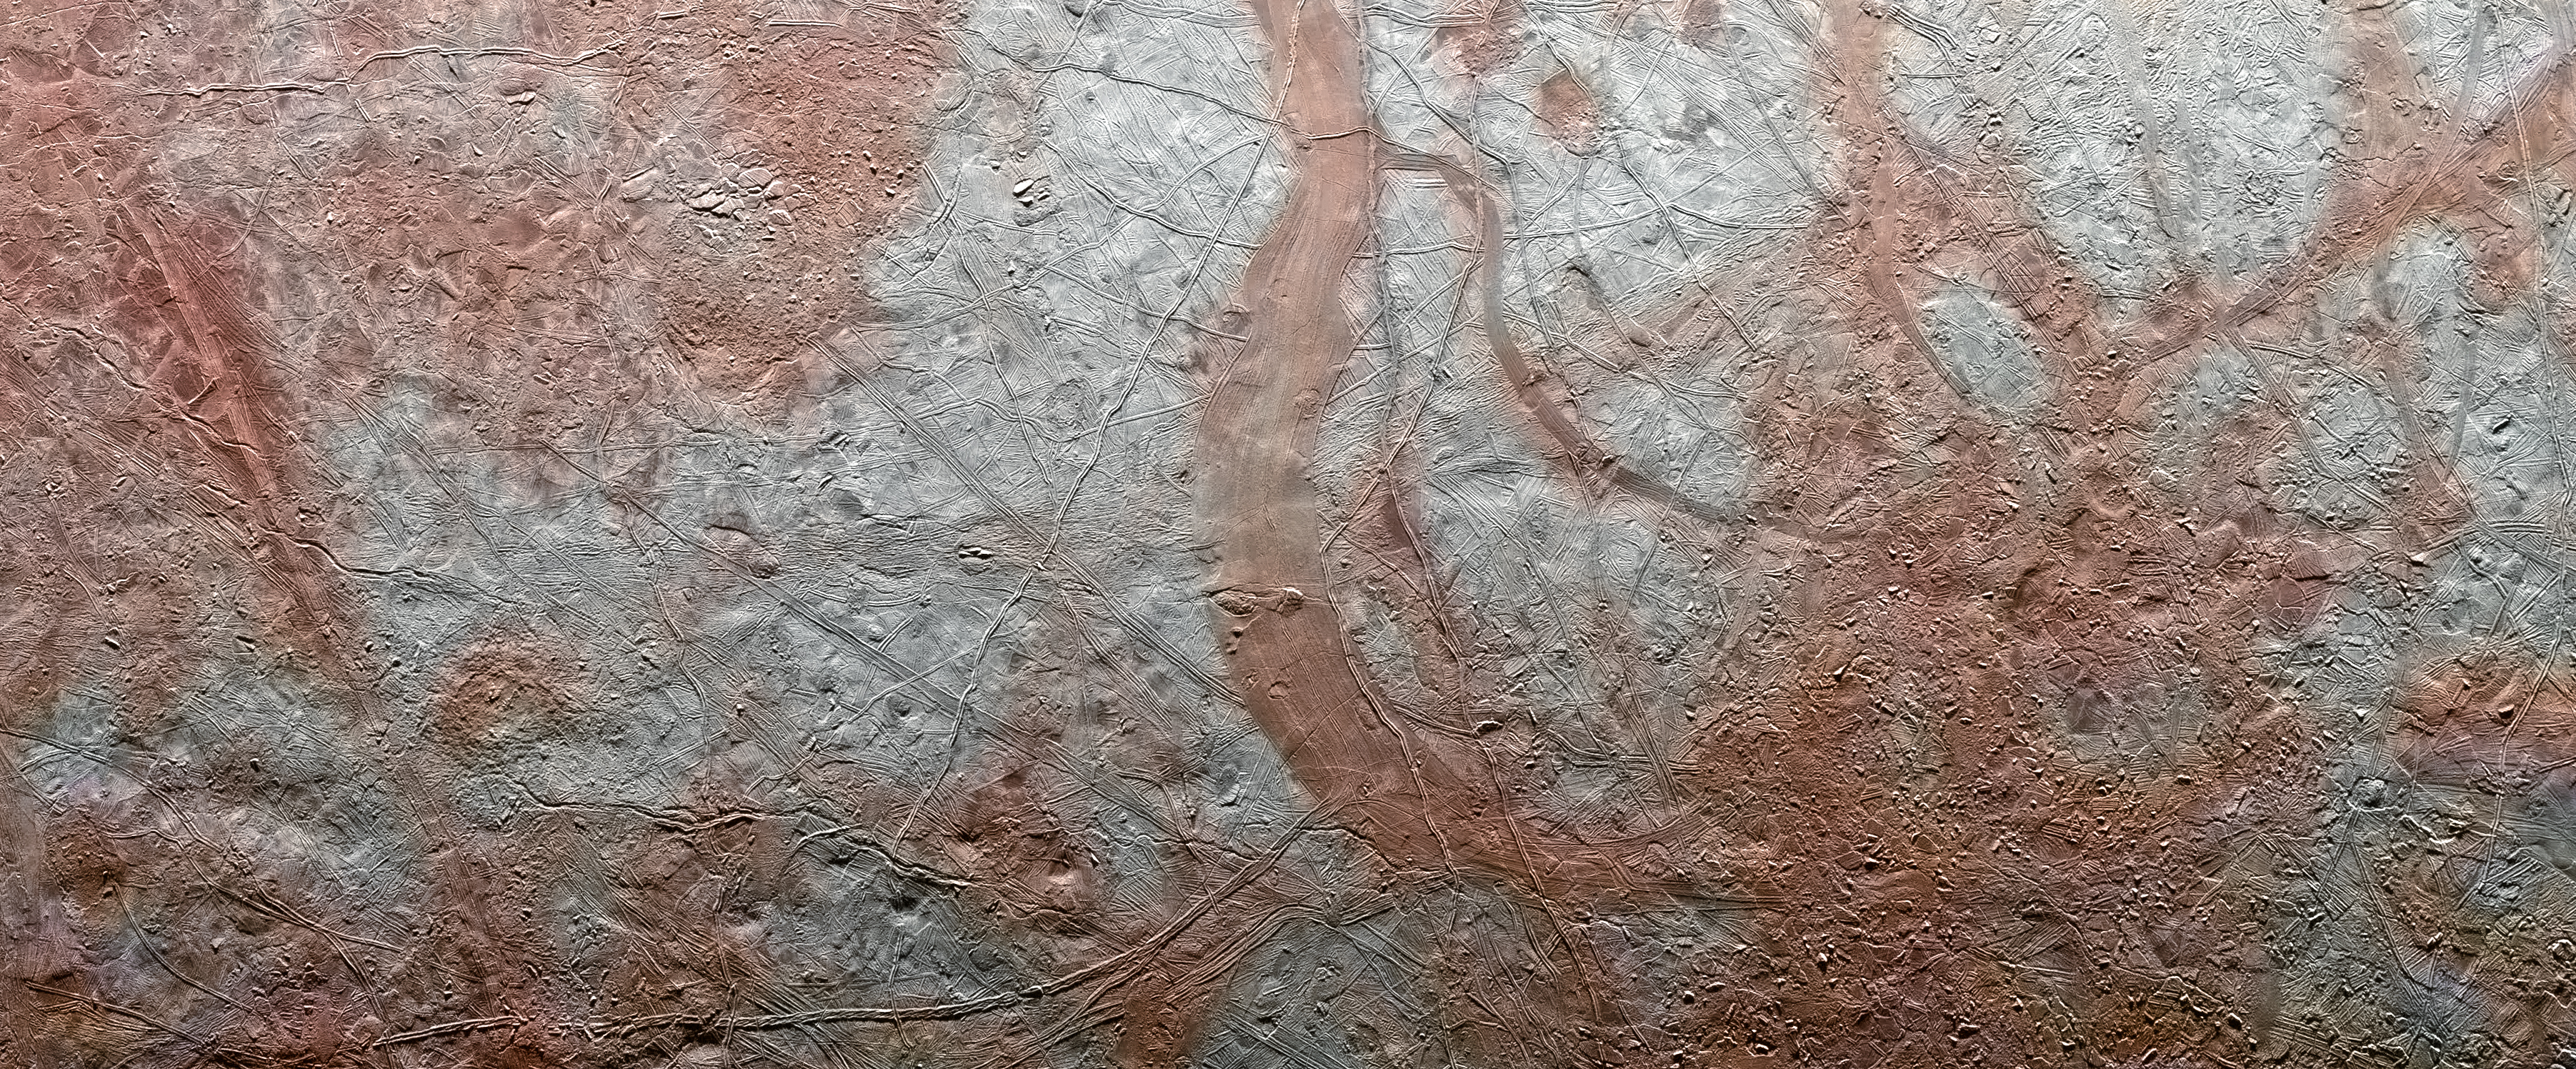 The Reddish Bands of Europa | The Planetary Society3606 x 1496